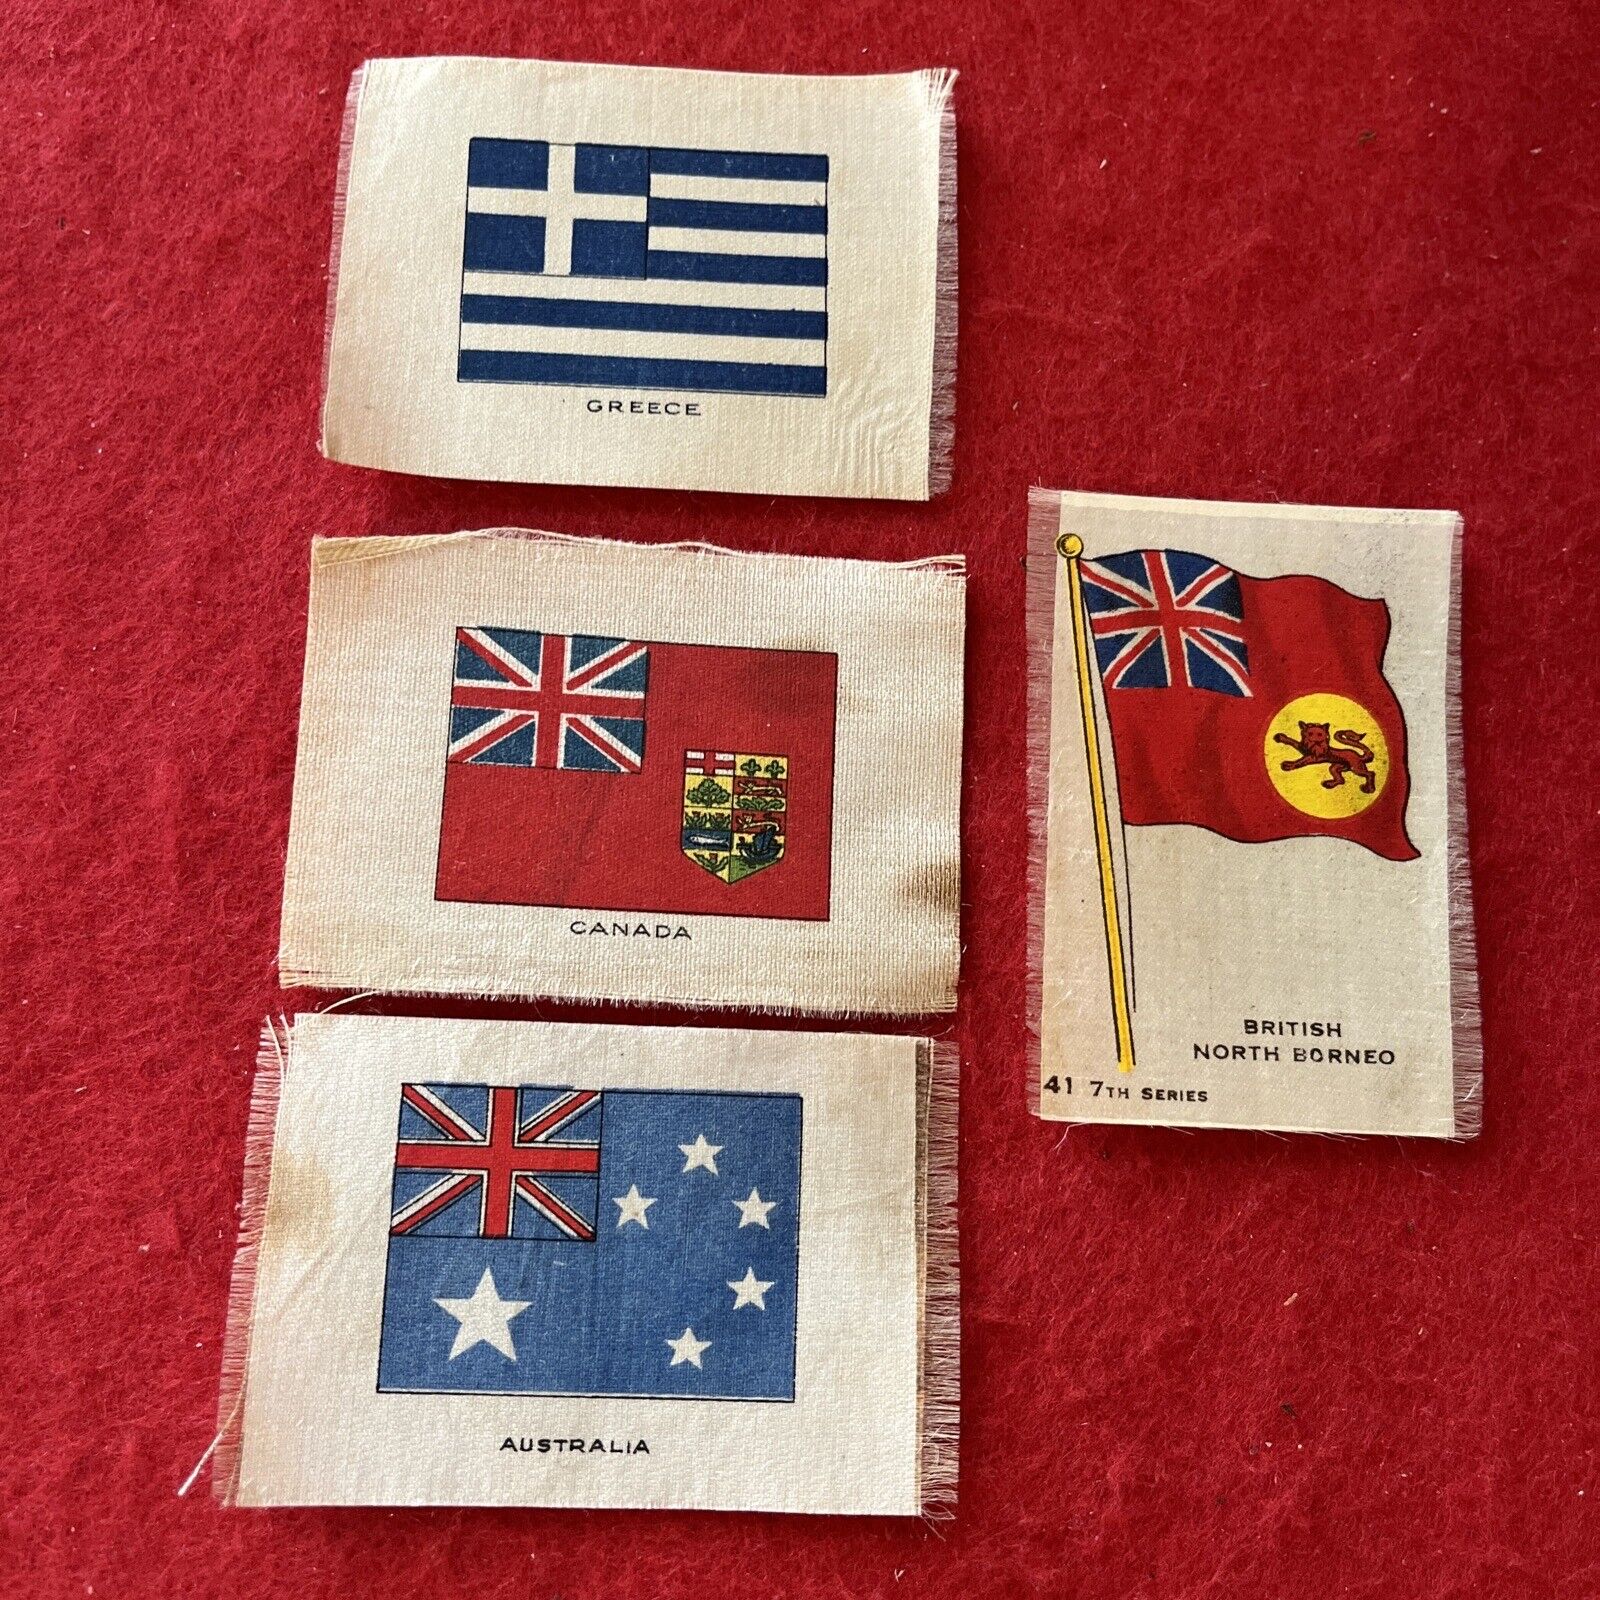 Late 1800s Early 1900s Tobacco Era “Silks” Flags Lot (4) All F-G Condition